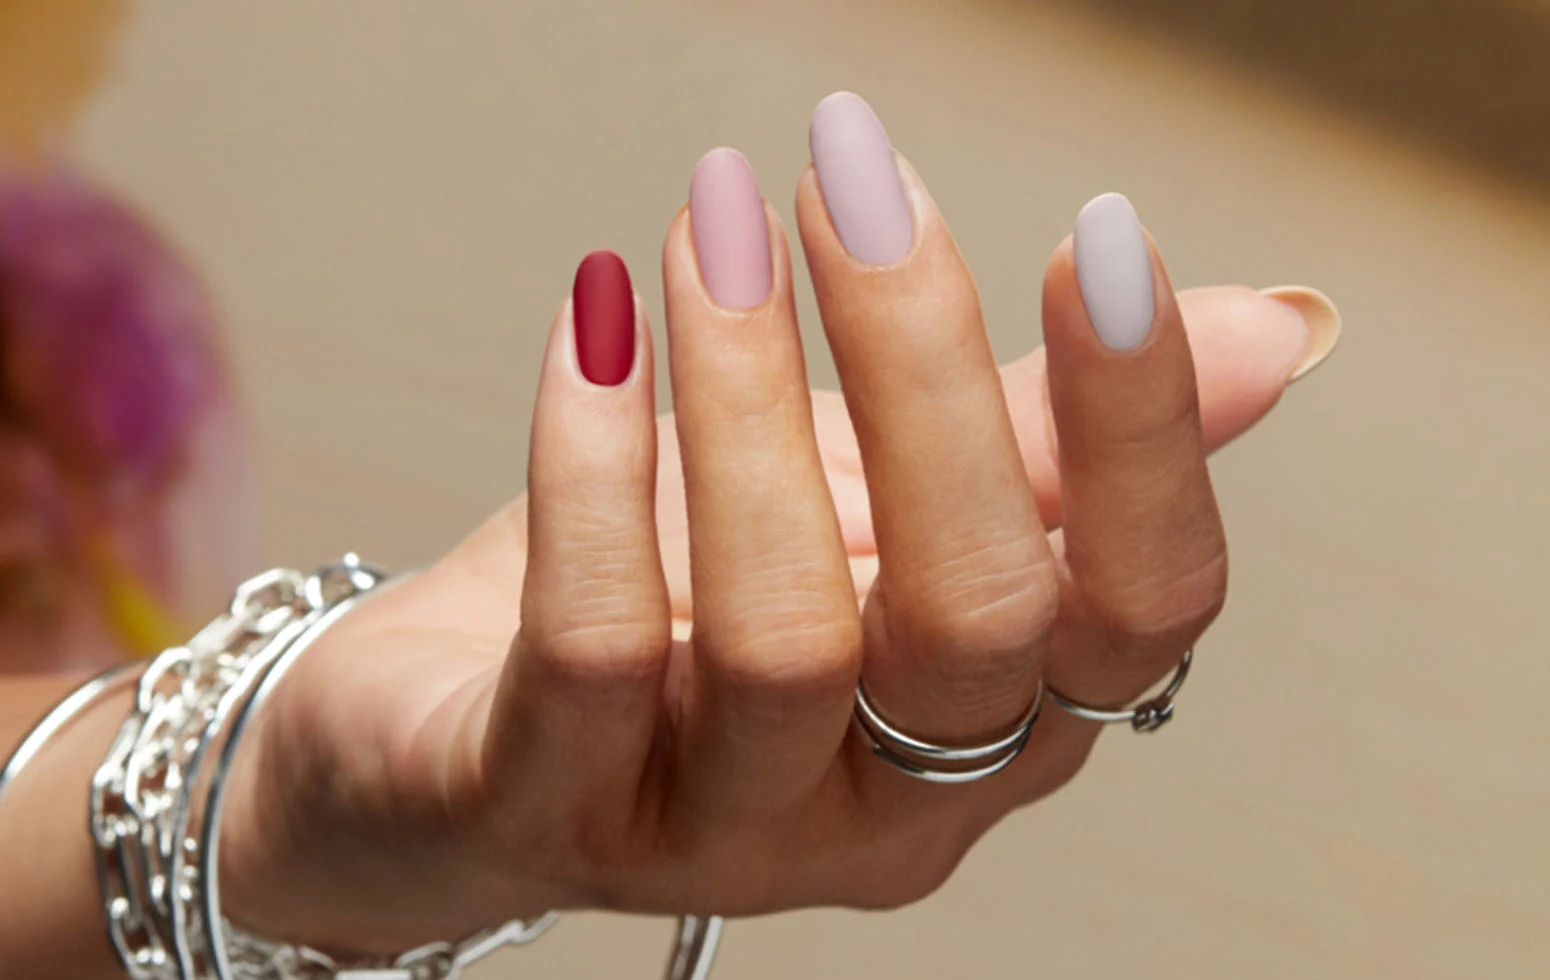 Matte Is Back: Introducing the new OPI GelColor Stay Matte Top Coat